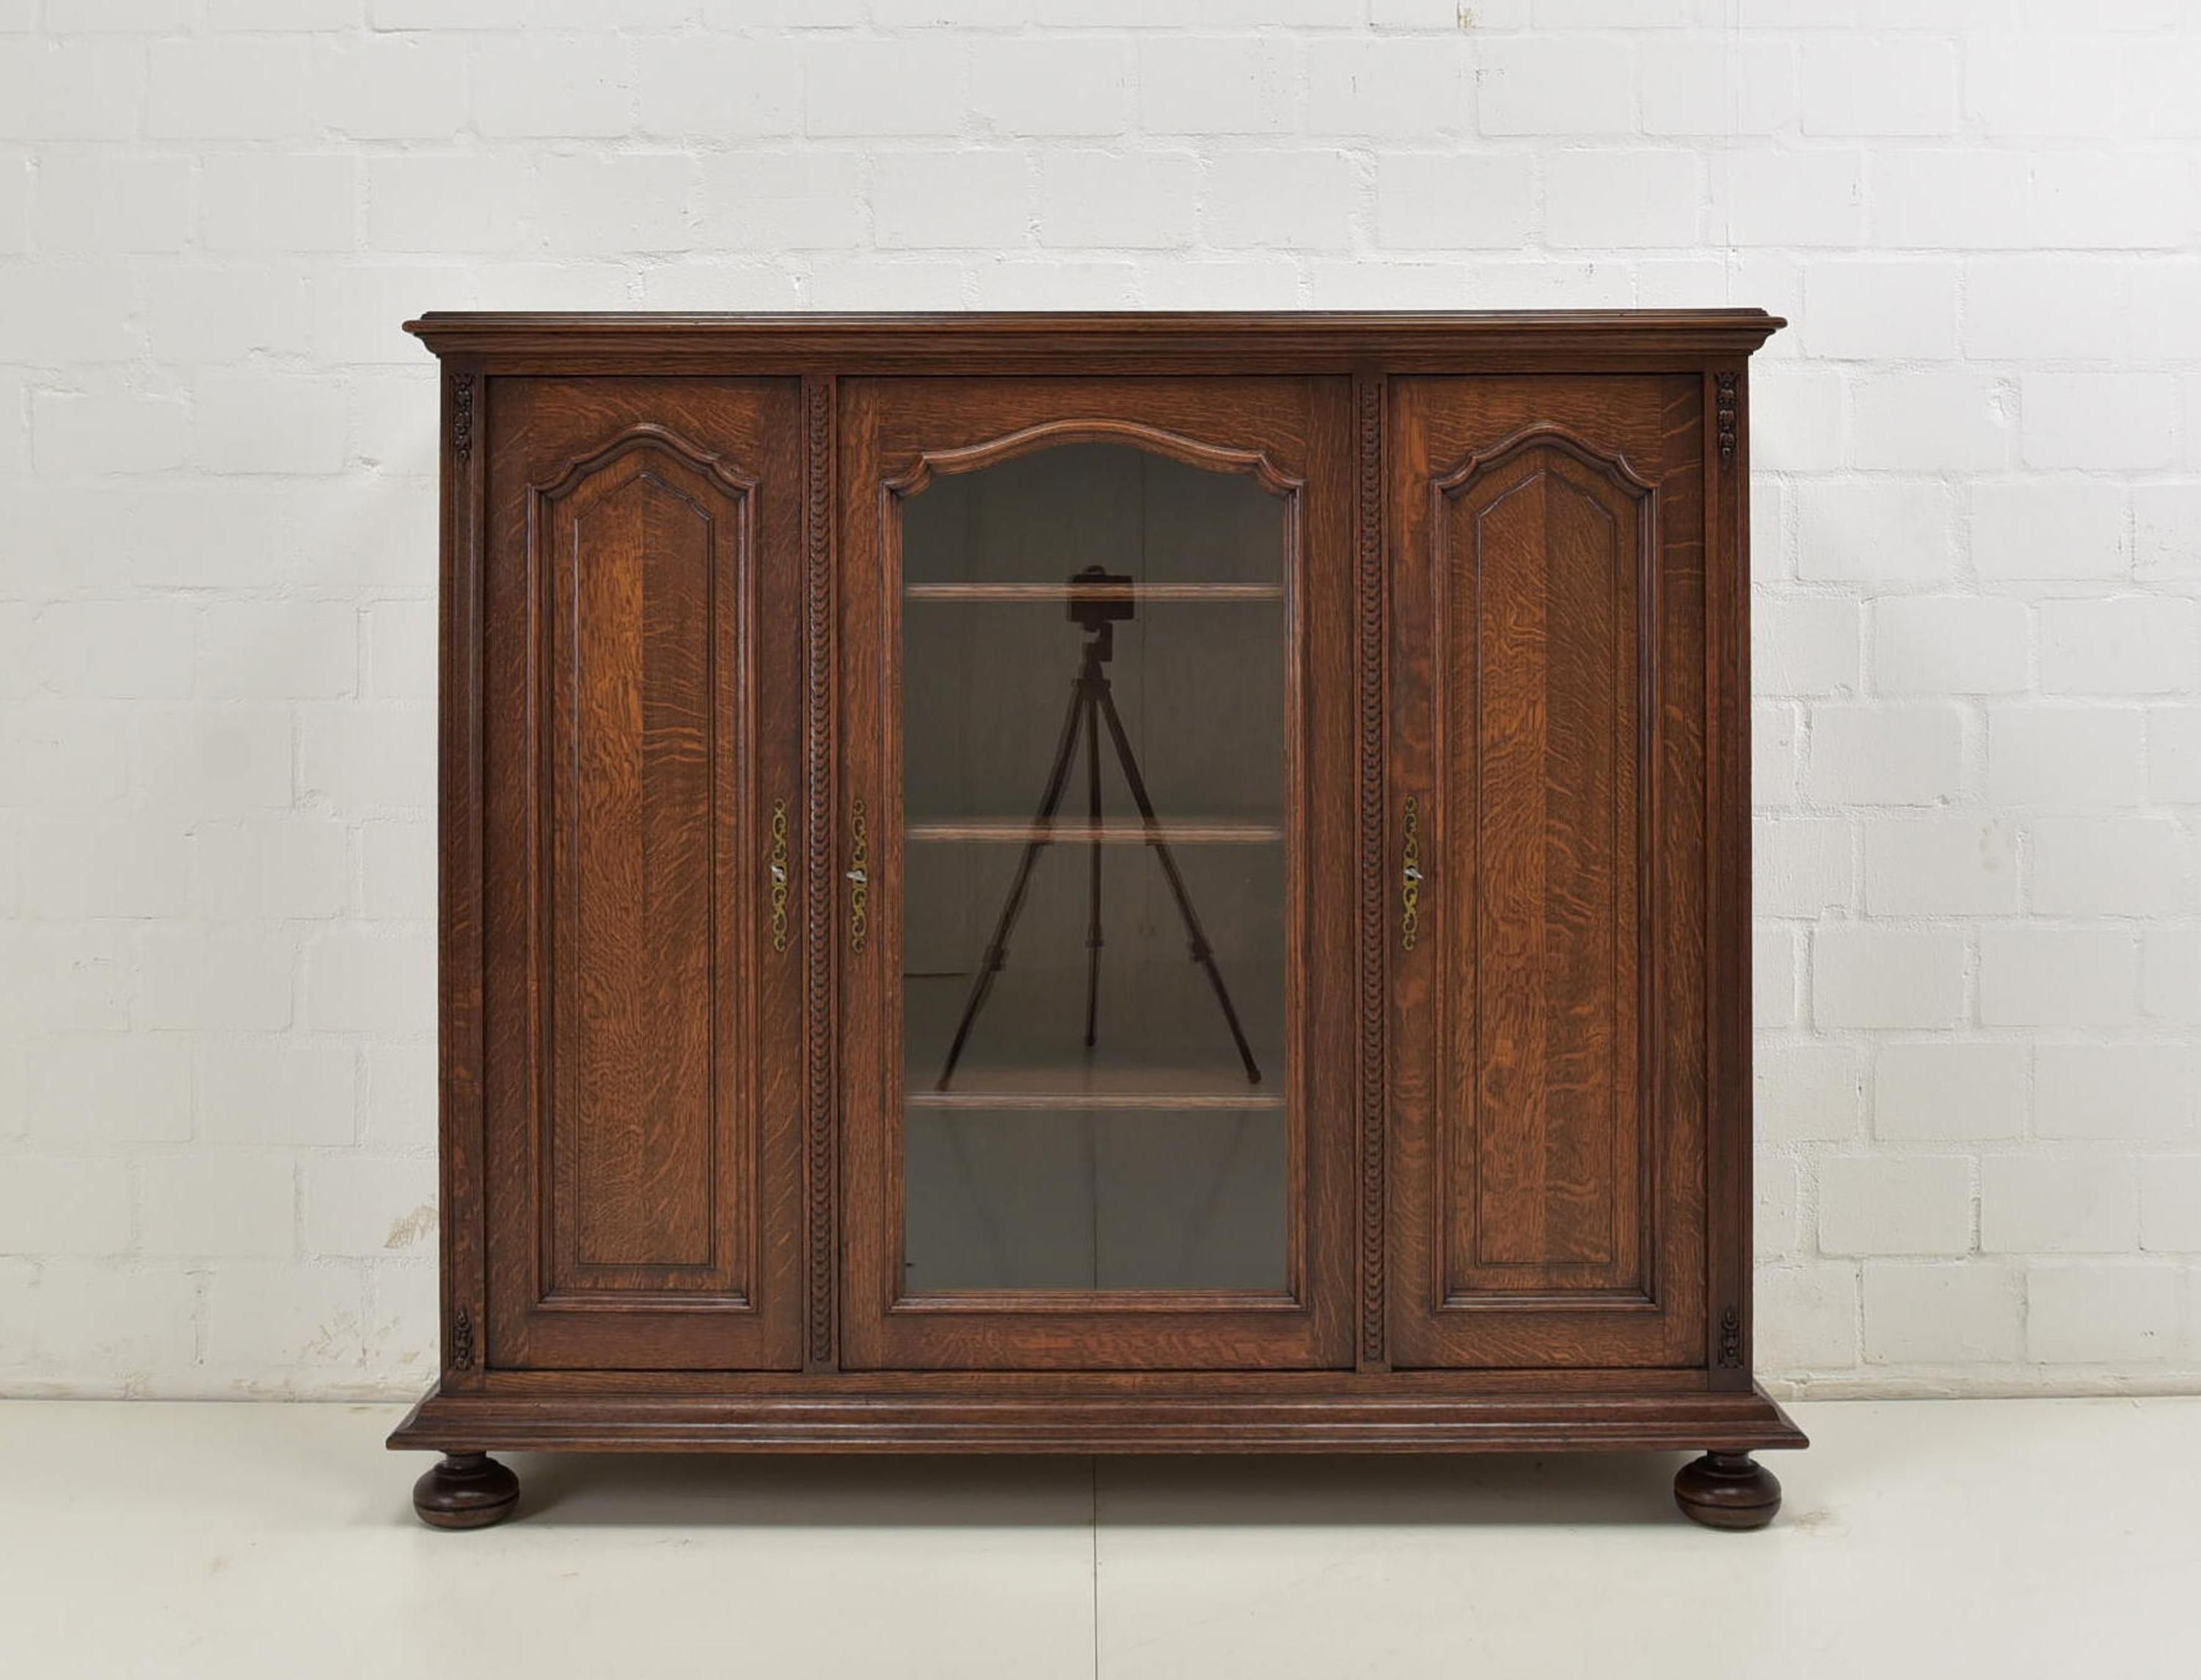 Low display cabinet restored solid oak around 1930 small

Features:
Three-door model with 9 shelves
Height-adjustable shelves
Original glazing
Cassette fillings
Subtle carved decor
Very nice patina
The cabinet cannot be